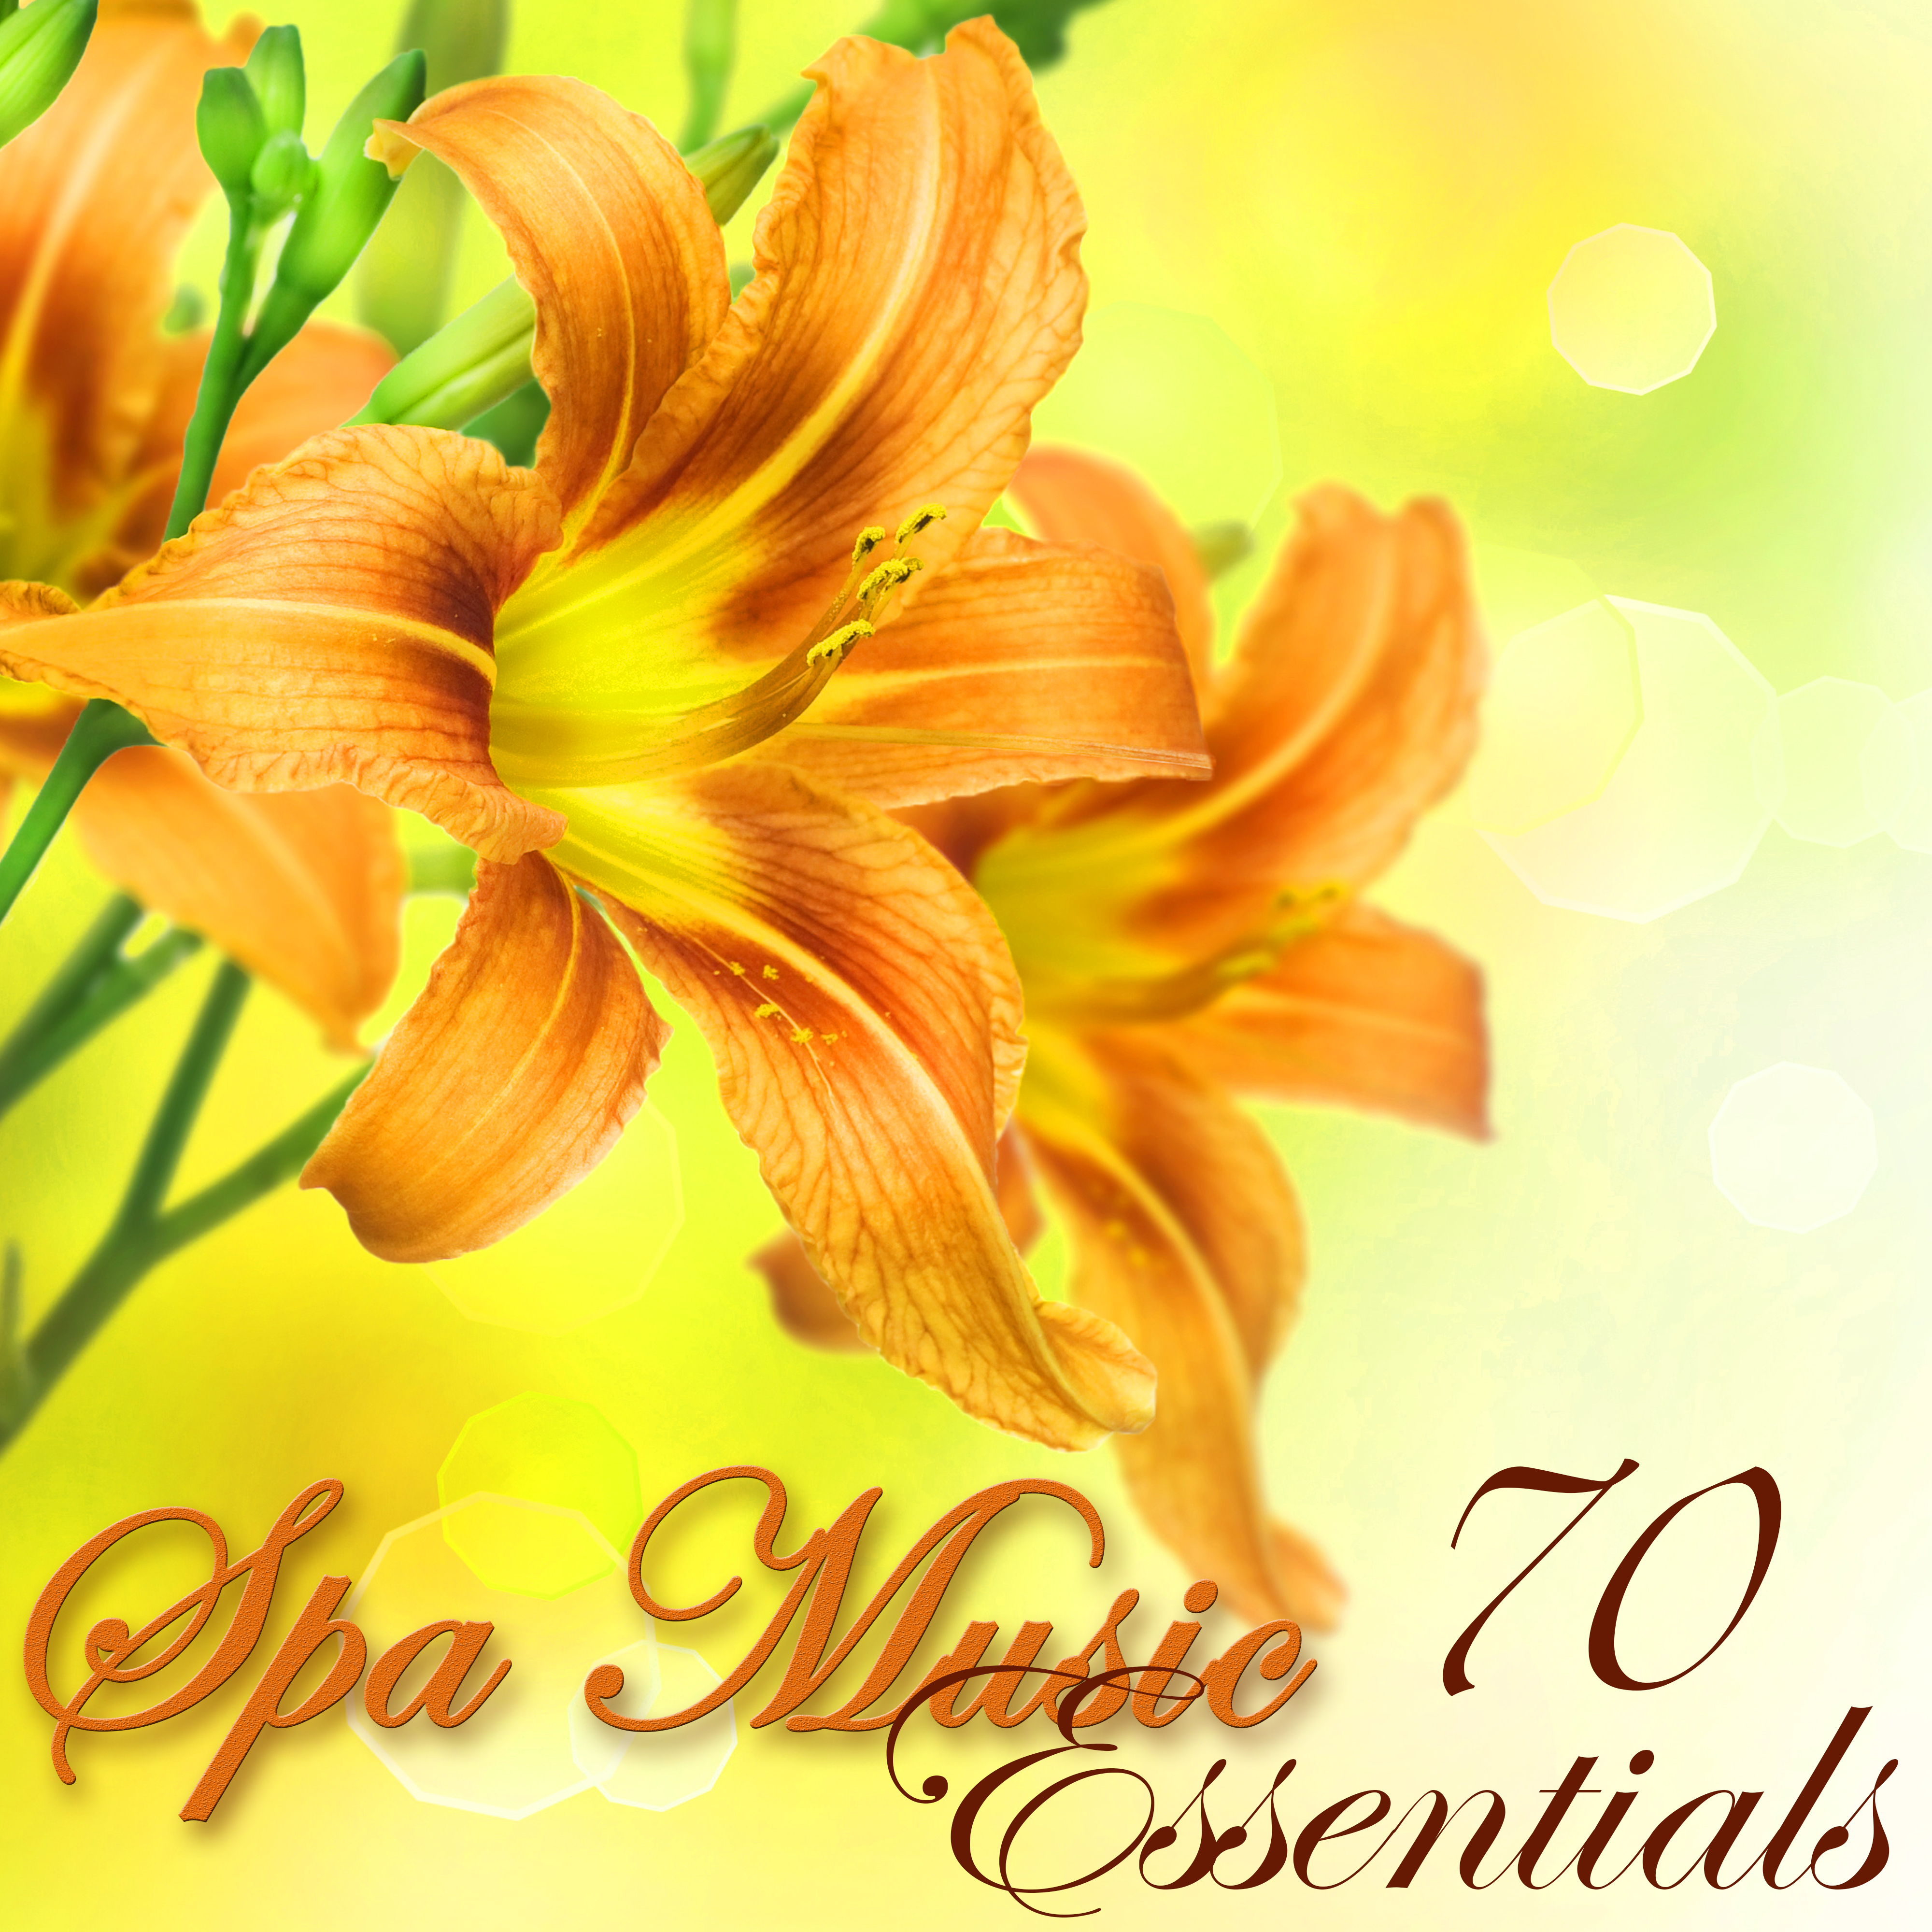 Spa Music Essentials – 70 Soothing Spa Sounds for Wellness, Massage, Relaxation, Body Detox, Weight Loss Yoga and Bikini Body Spa Treatments